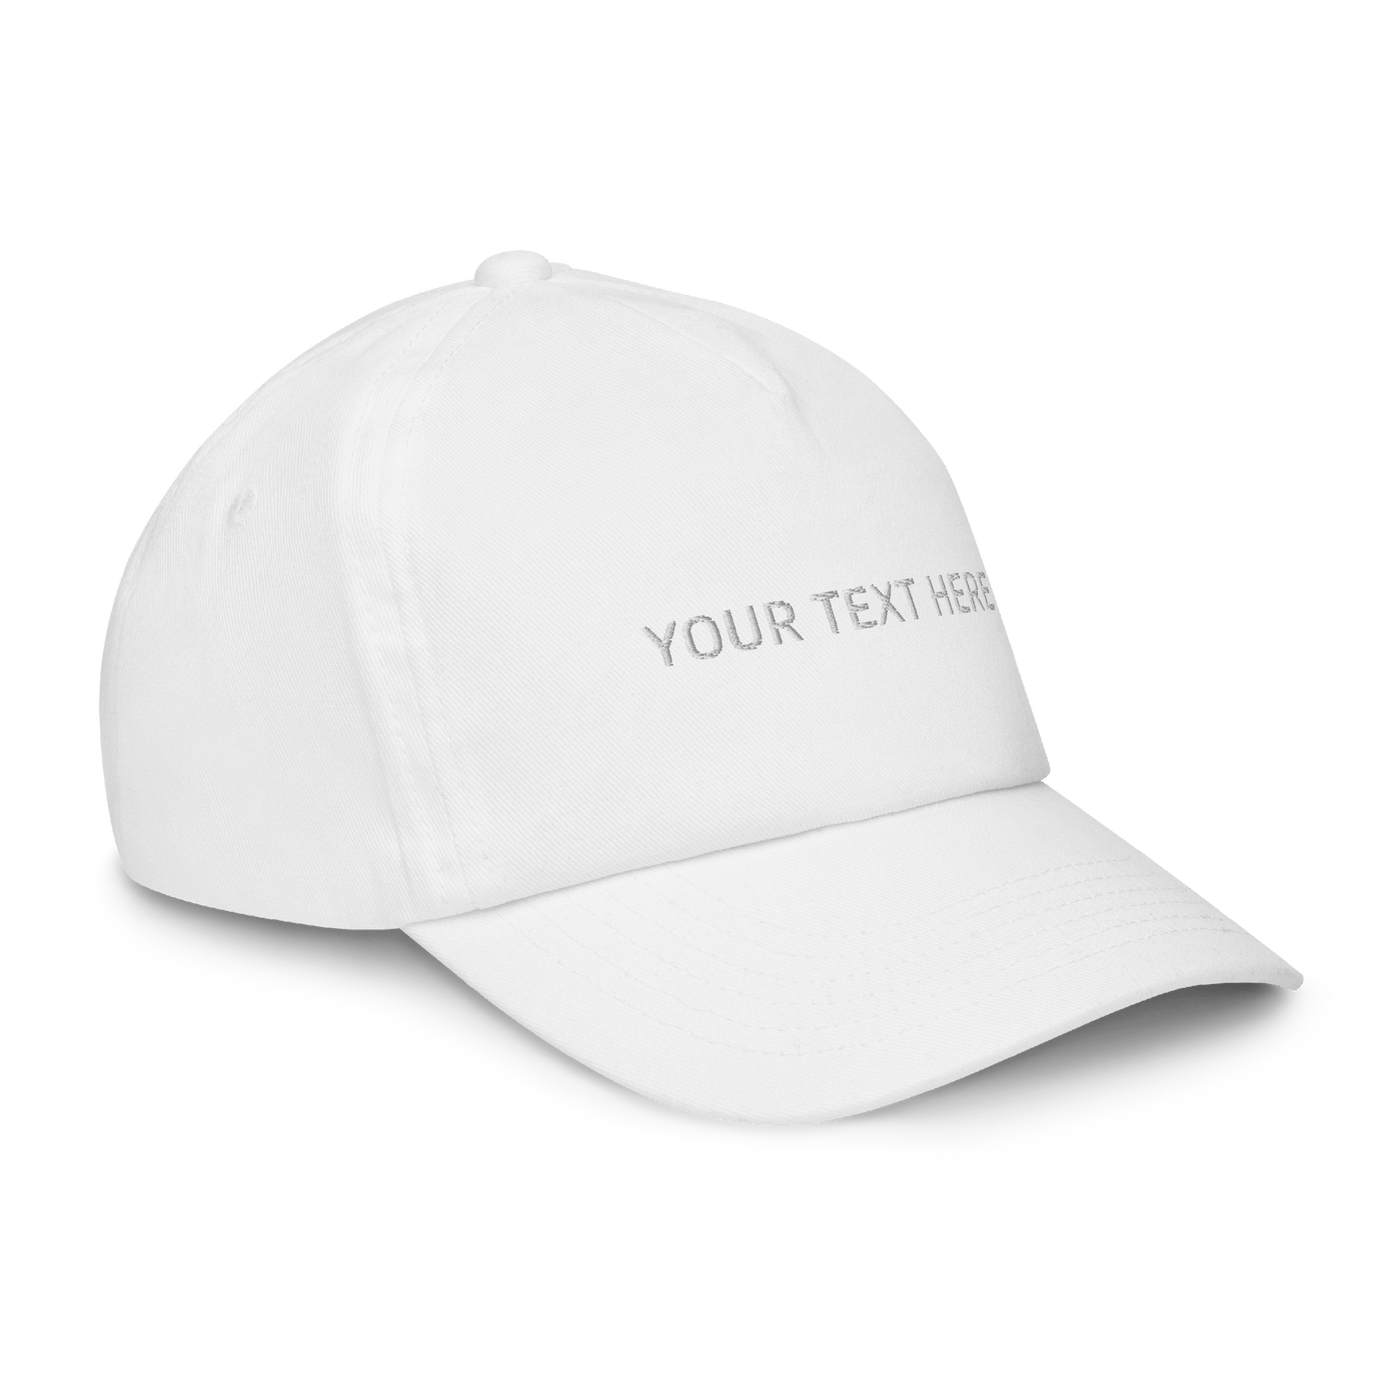 Personalize a Kids cap - White - - Just Another Cap Store